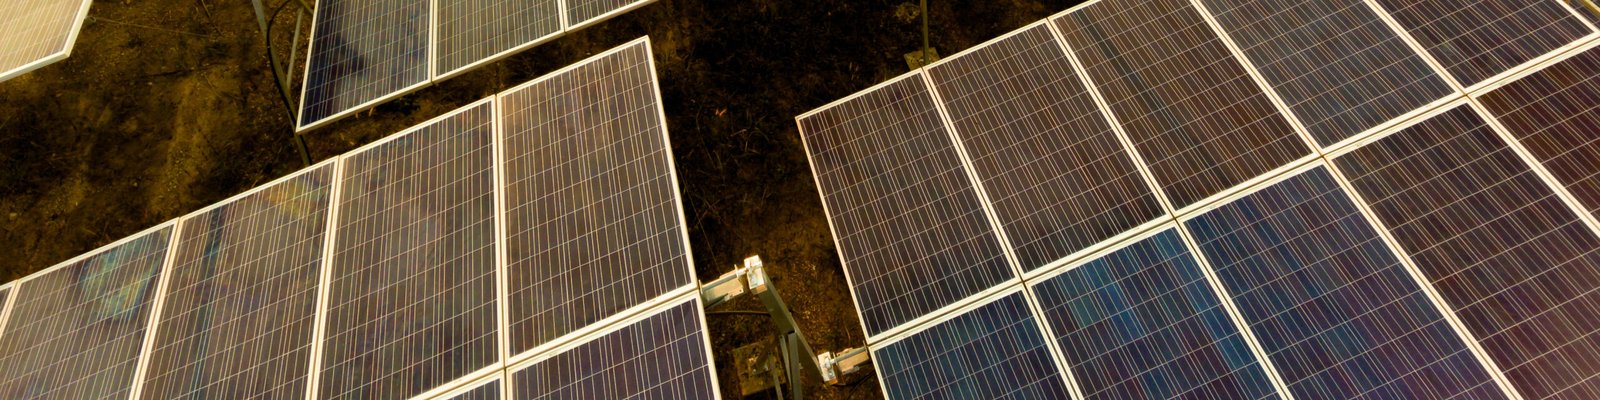 A moderate-sized array of solar panels, sunset light